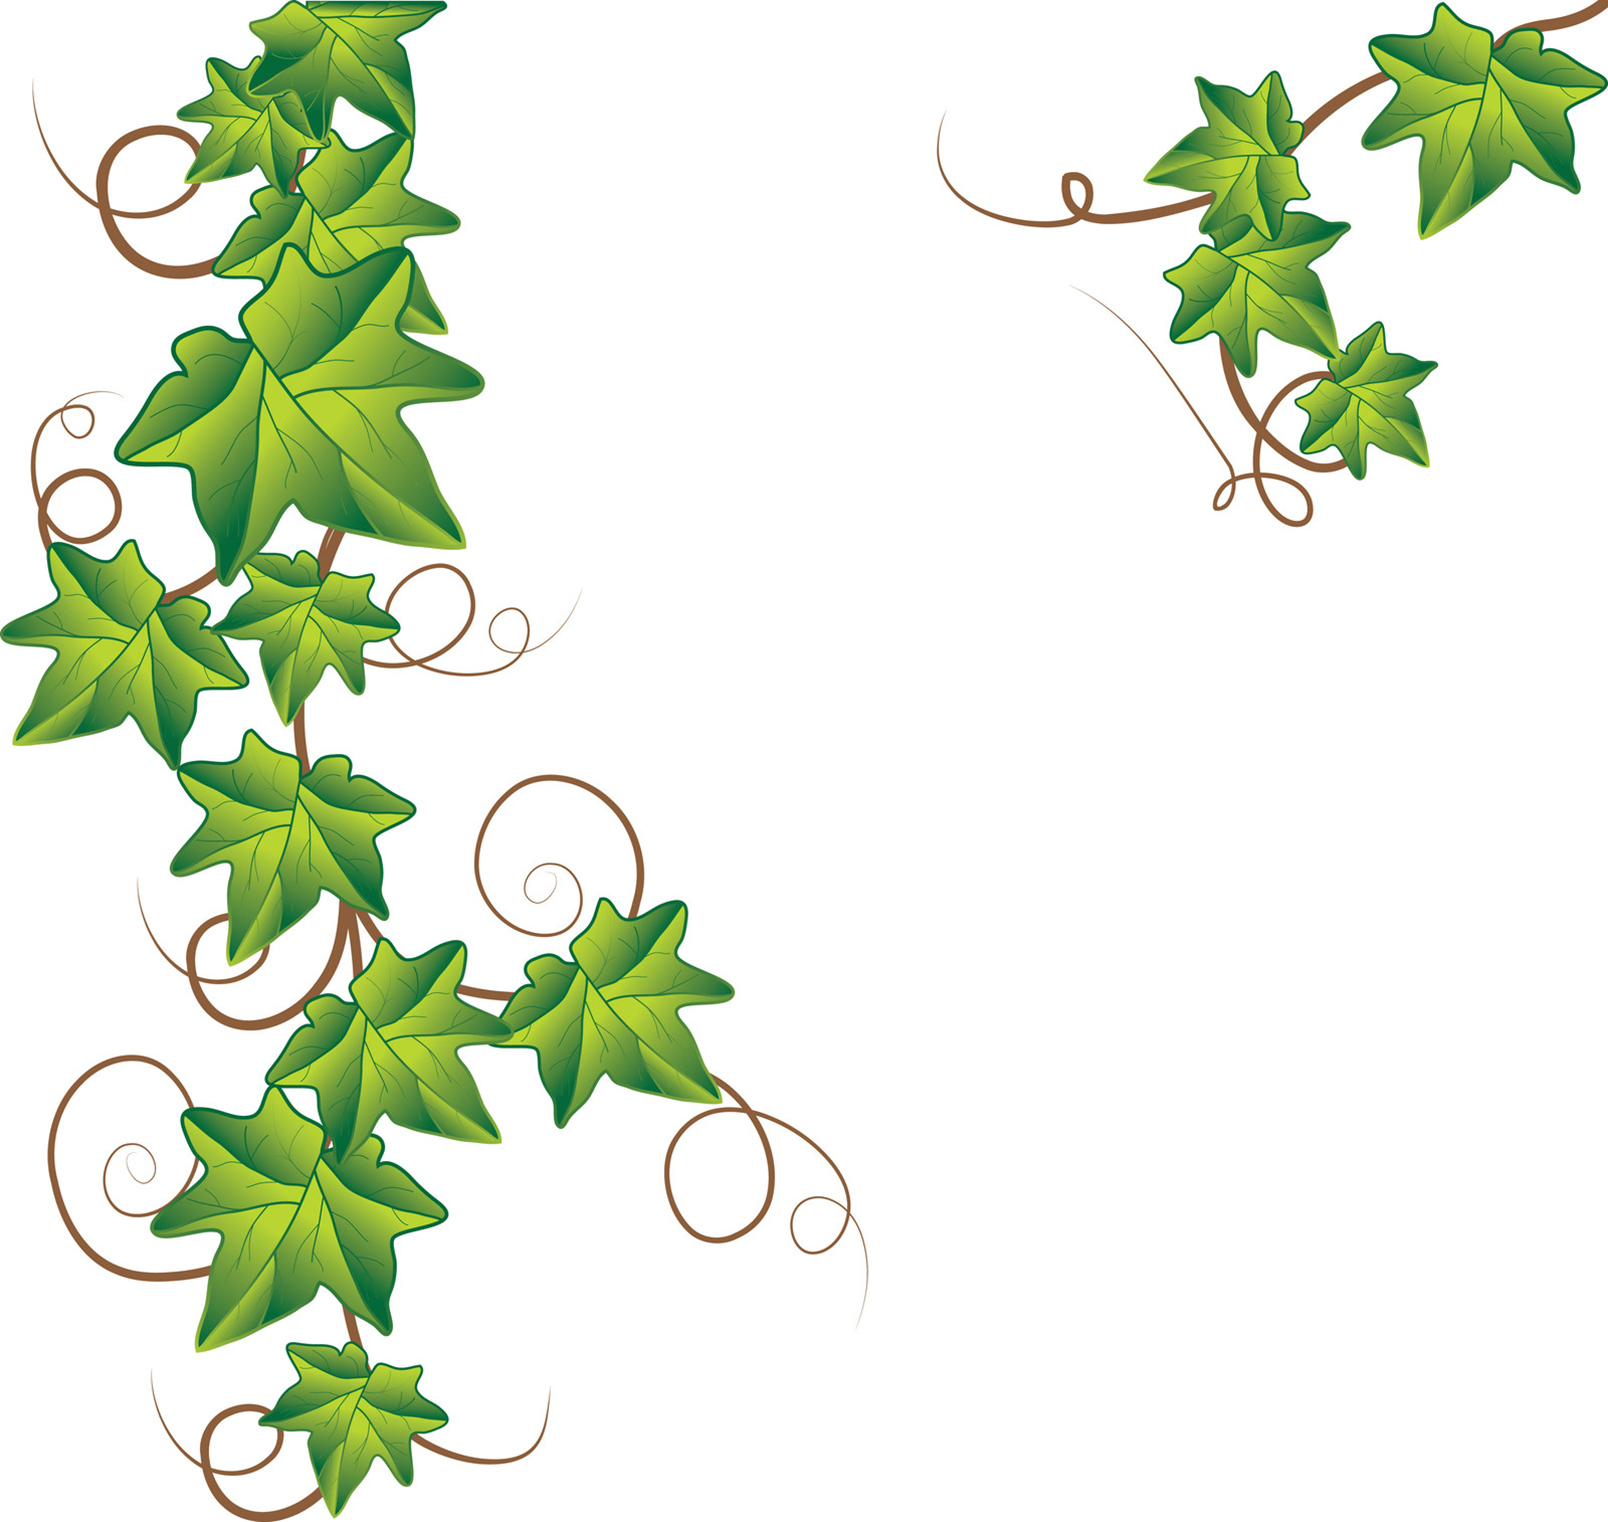 Green vines clip art free clipart images 2